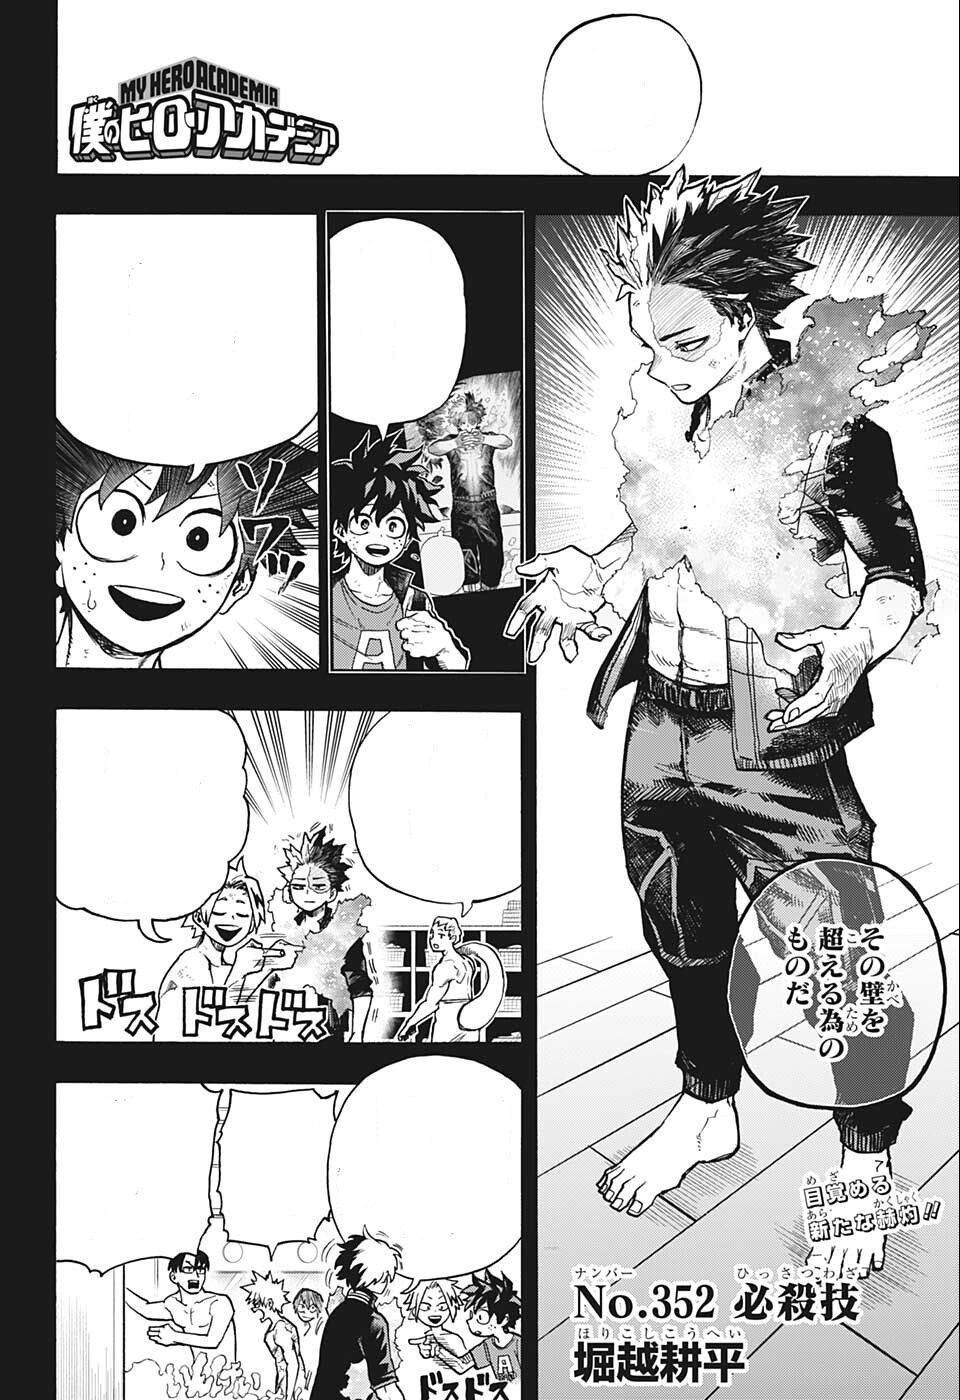 In what chapter of the manga does season 5 of My Hero Academia